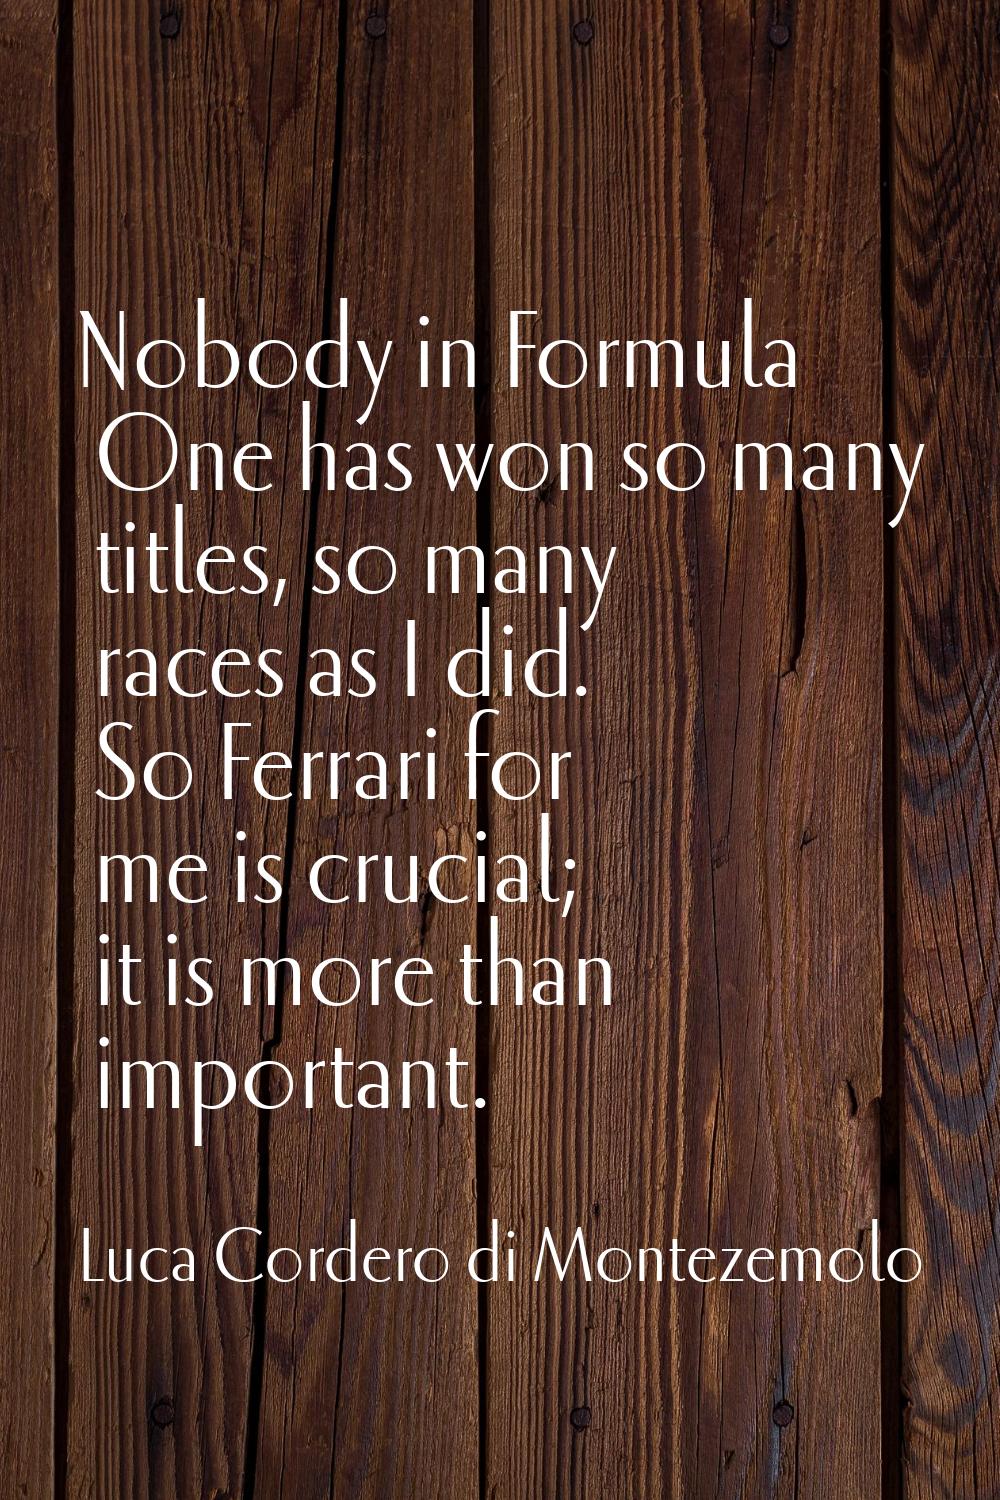 Nobody in Formula One has won so many titles, so many races as I did. So Ferrari for me is crucial;